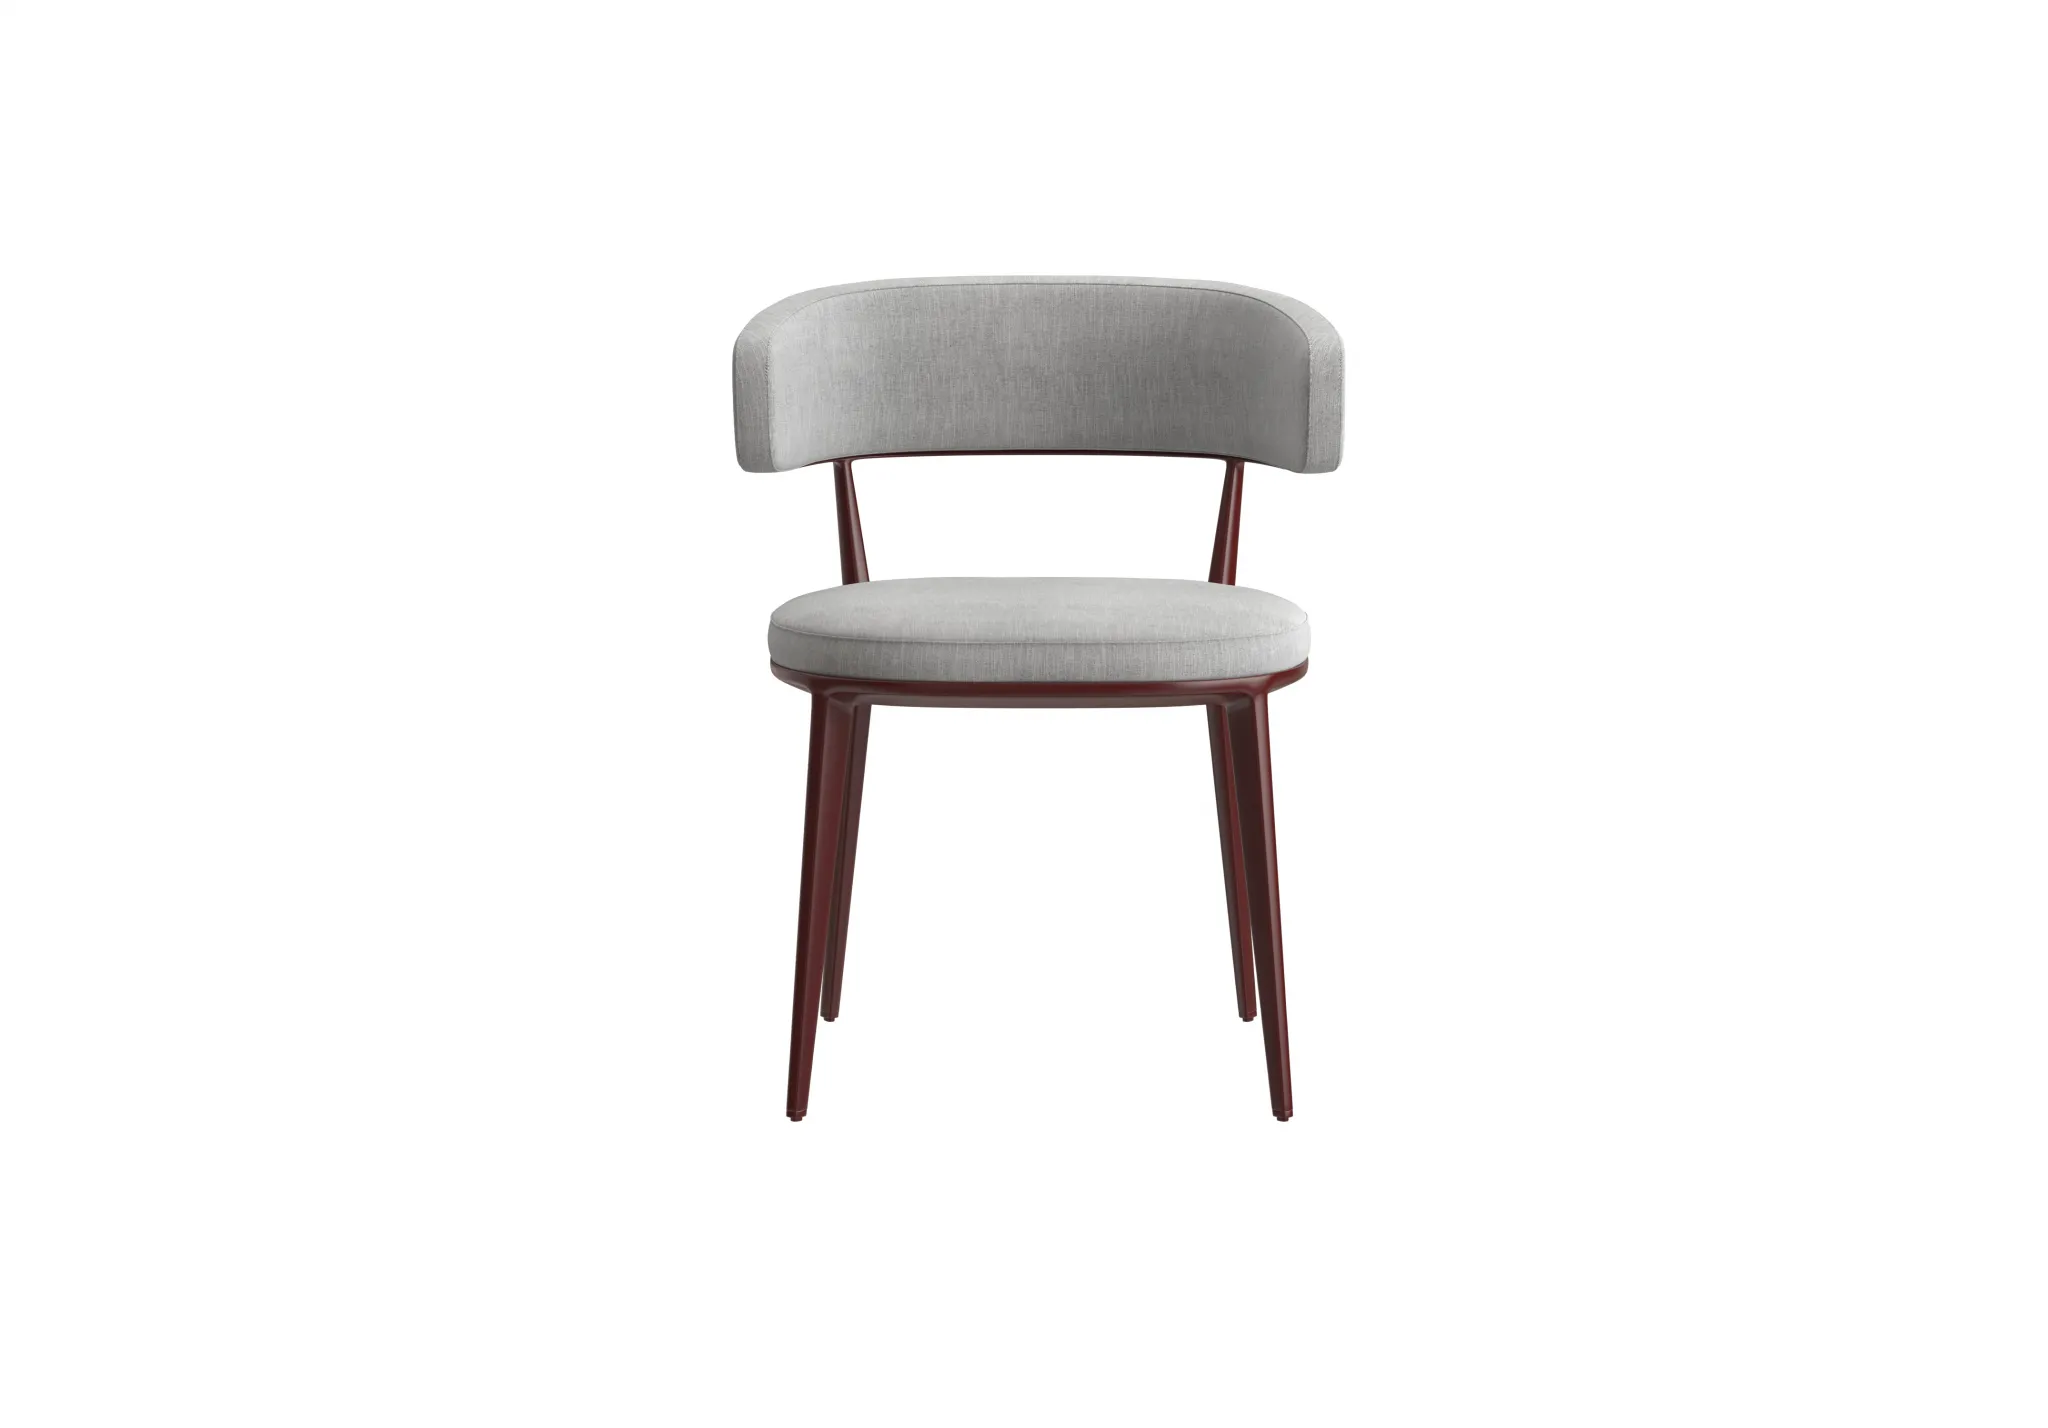 FURNITURE 3D MODELS – CHAIRS – 0301